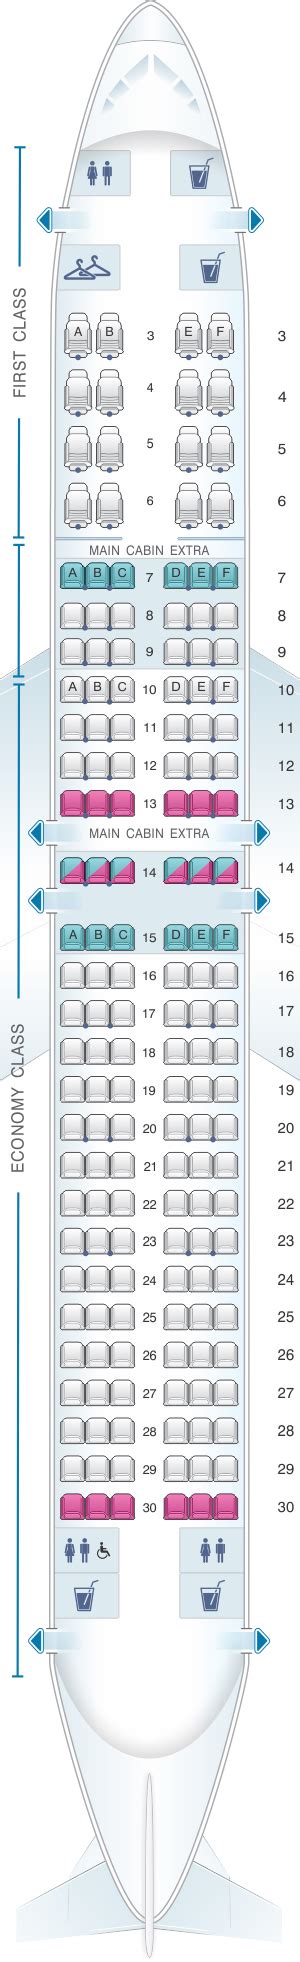 American airlines boeing 737-800 seating chart. Caribbean Airlines' Boeing 737-800 is used on all routes and is configured with 12 Business Class recliner seats, 42 Caribbean Plus and 96 Economy Class seats. Caribbean Plus is Caribbean Airlines' Premium Economy product, found in rows 4-10, which offers features not found in Economy for an additional cost for all Caribbean Airlines ... 